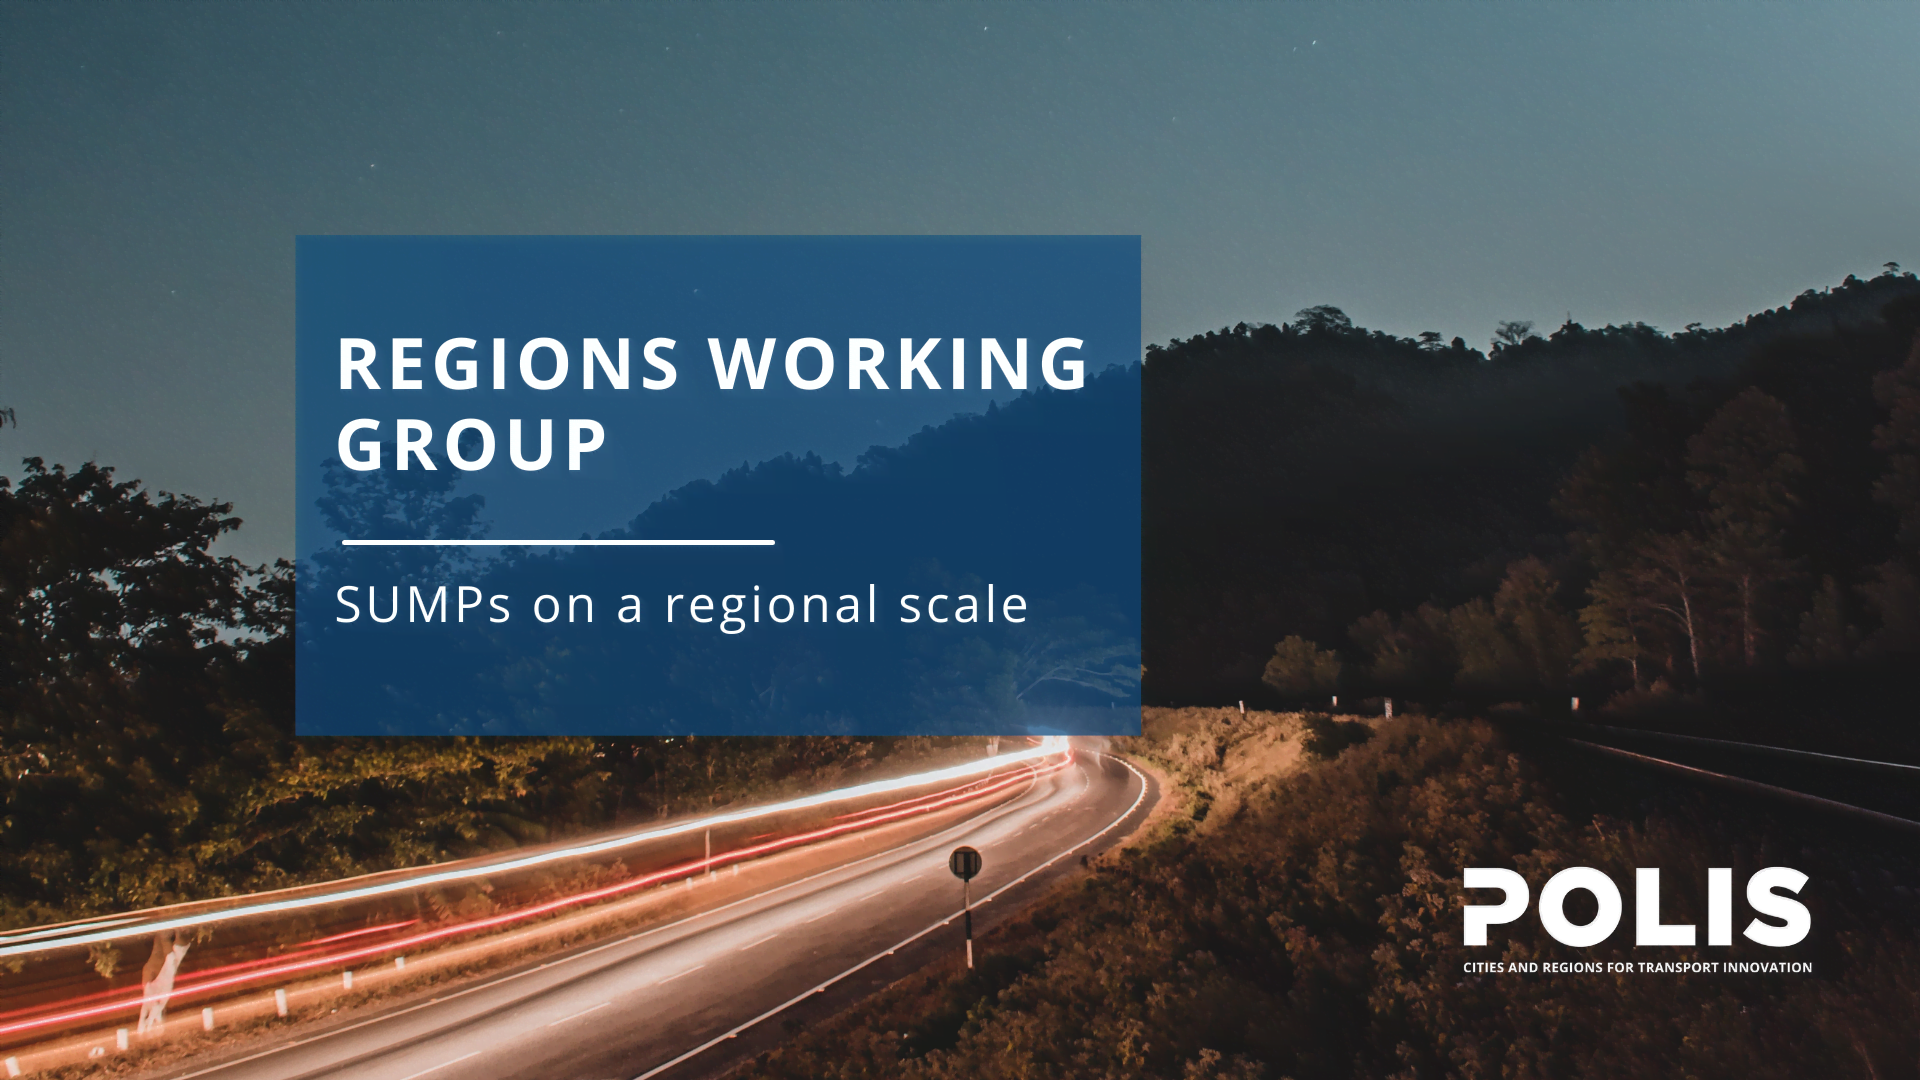 SUMPs are not just for cities: Regions Working Group meets